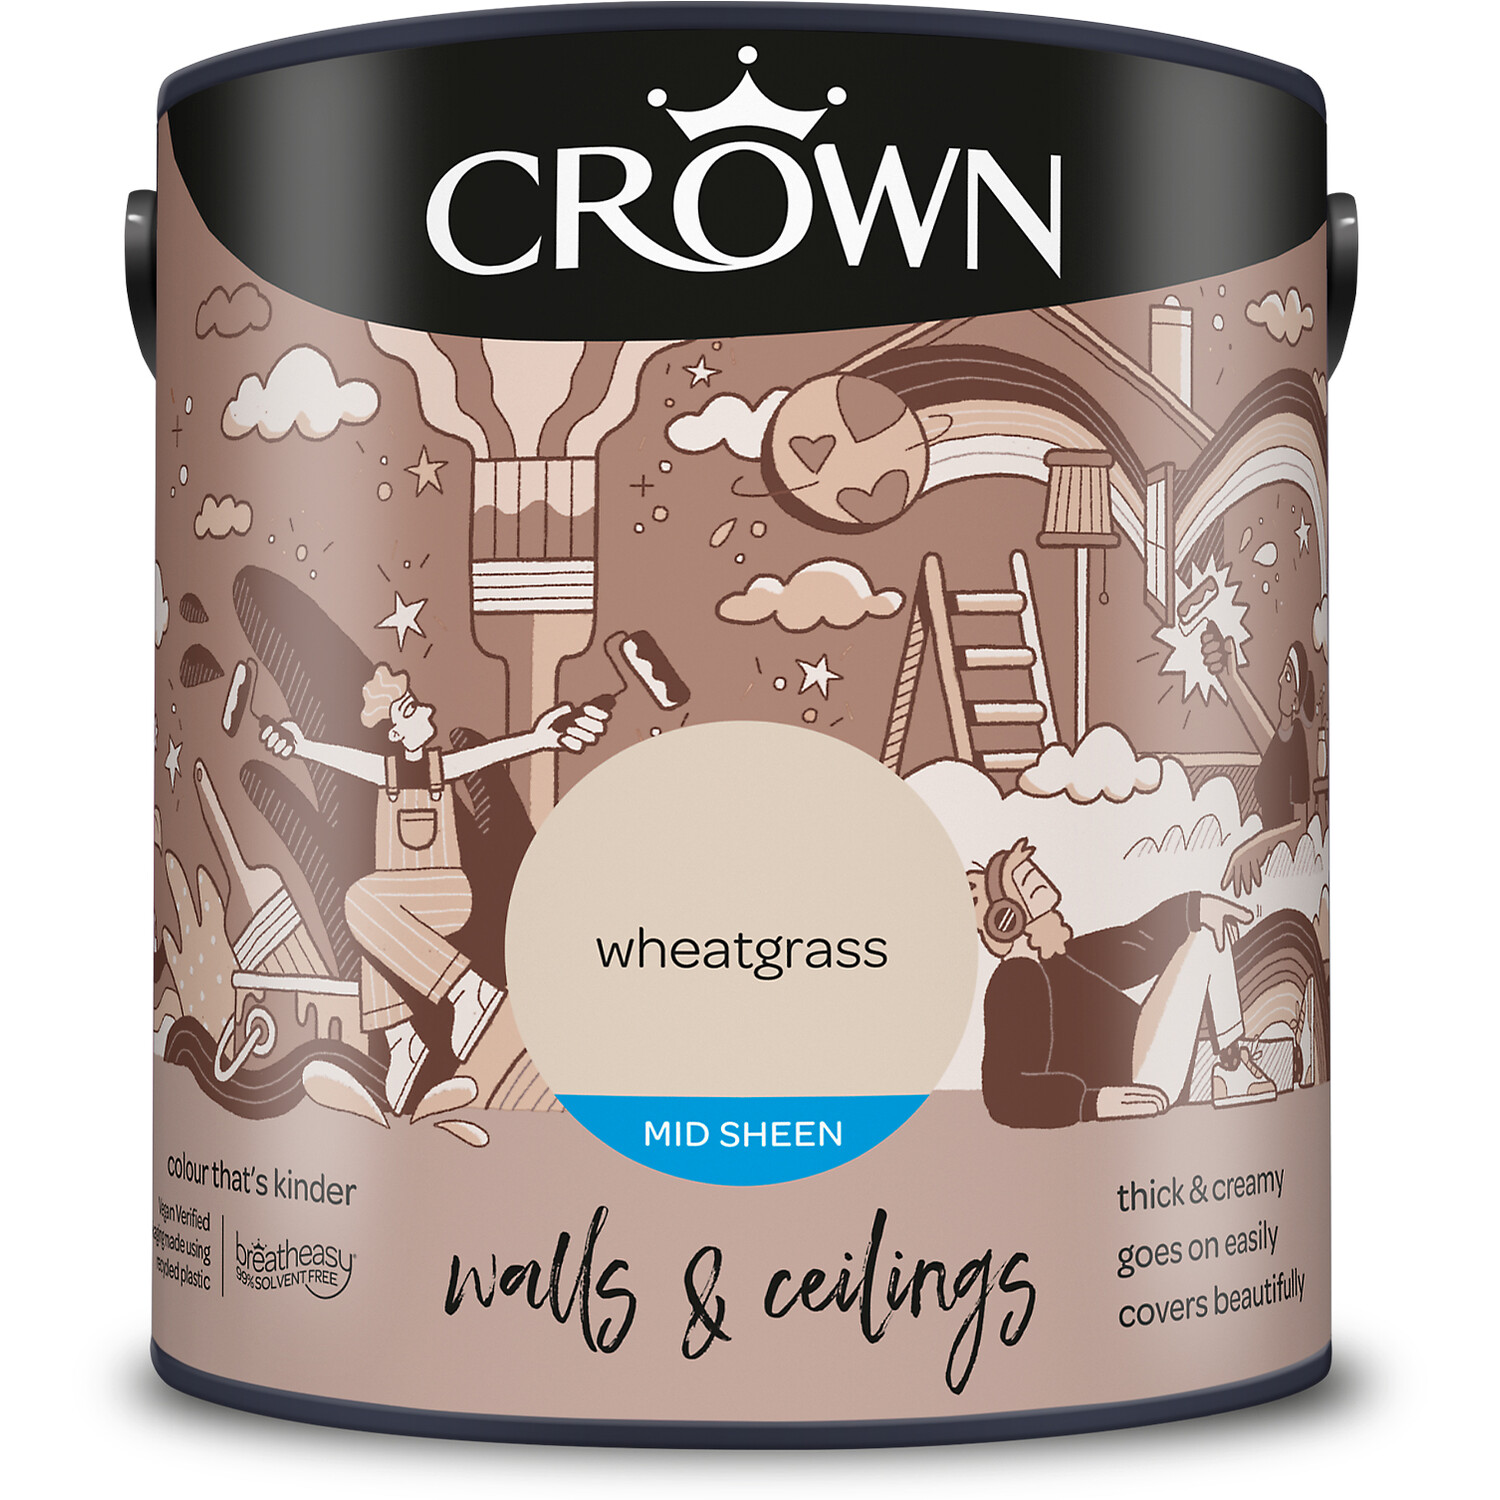 Crown Walls & Ceilings Wheatgrass Mid Sheen Emulsion Paint 2.5L Image 2